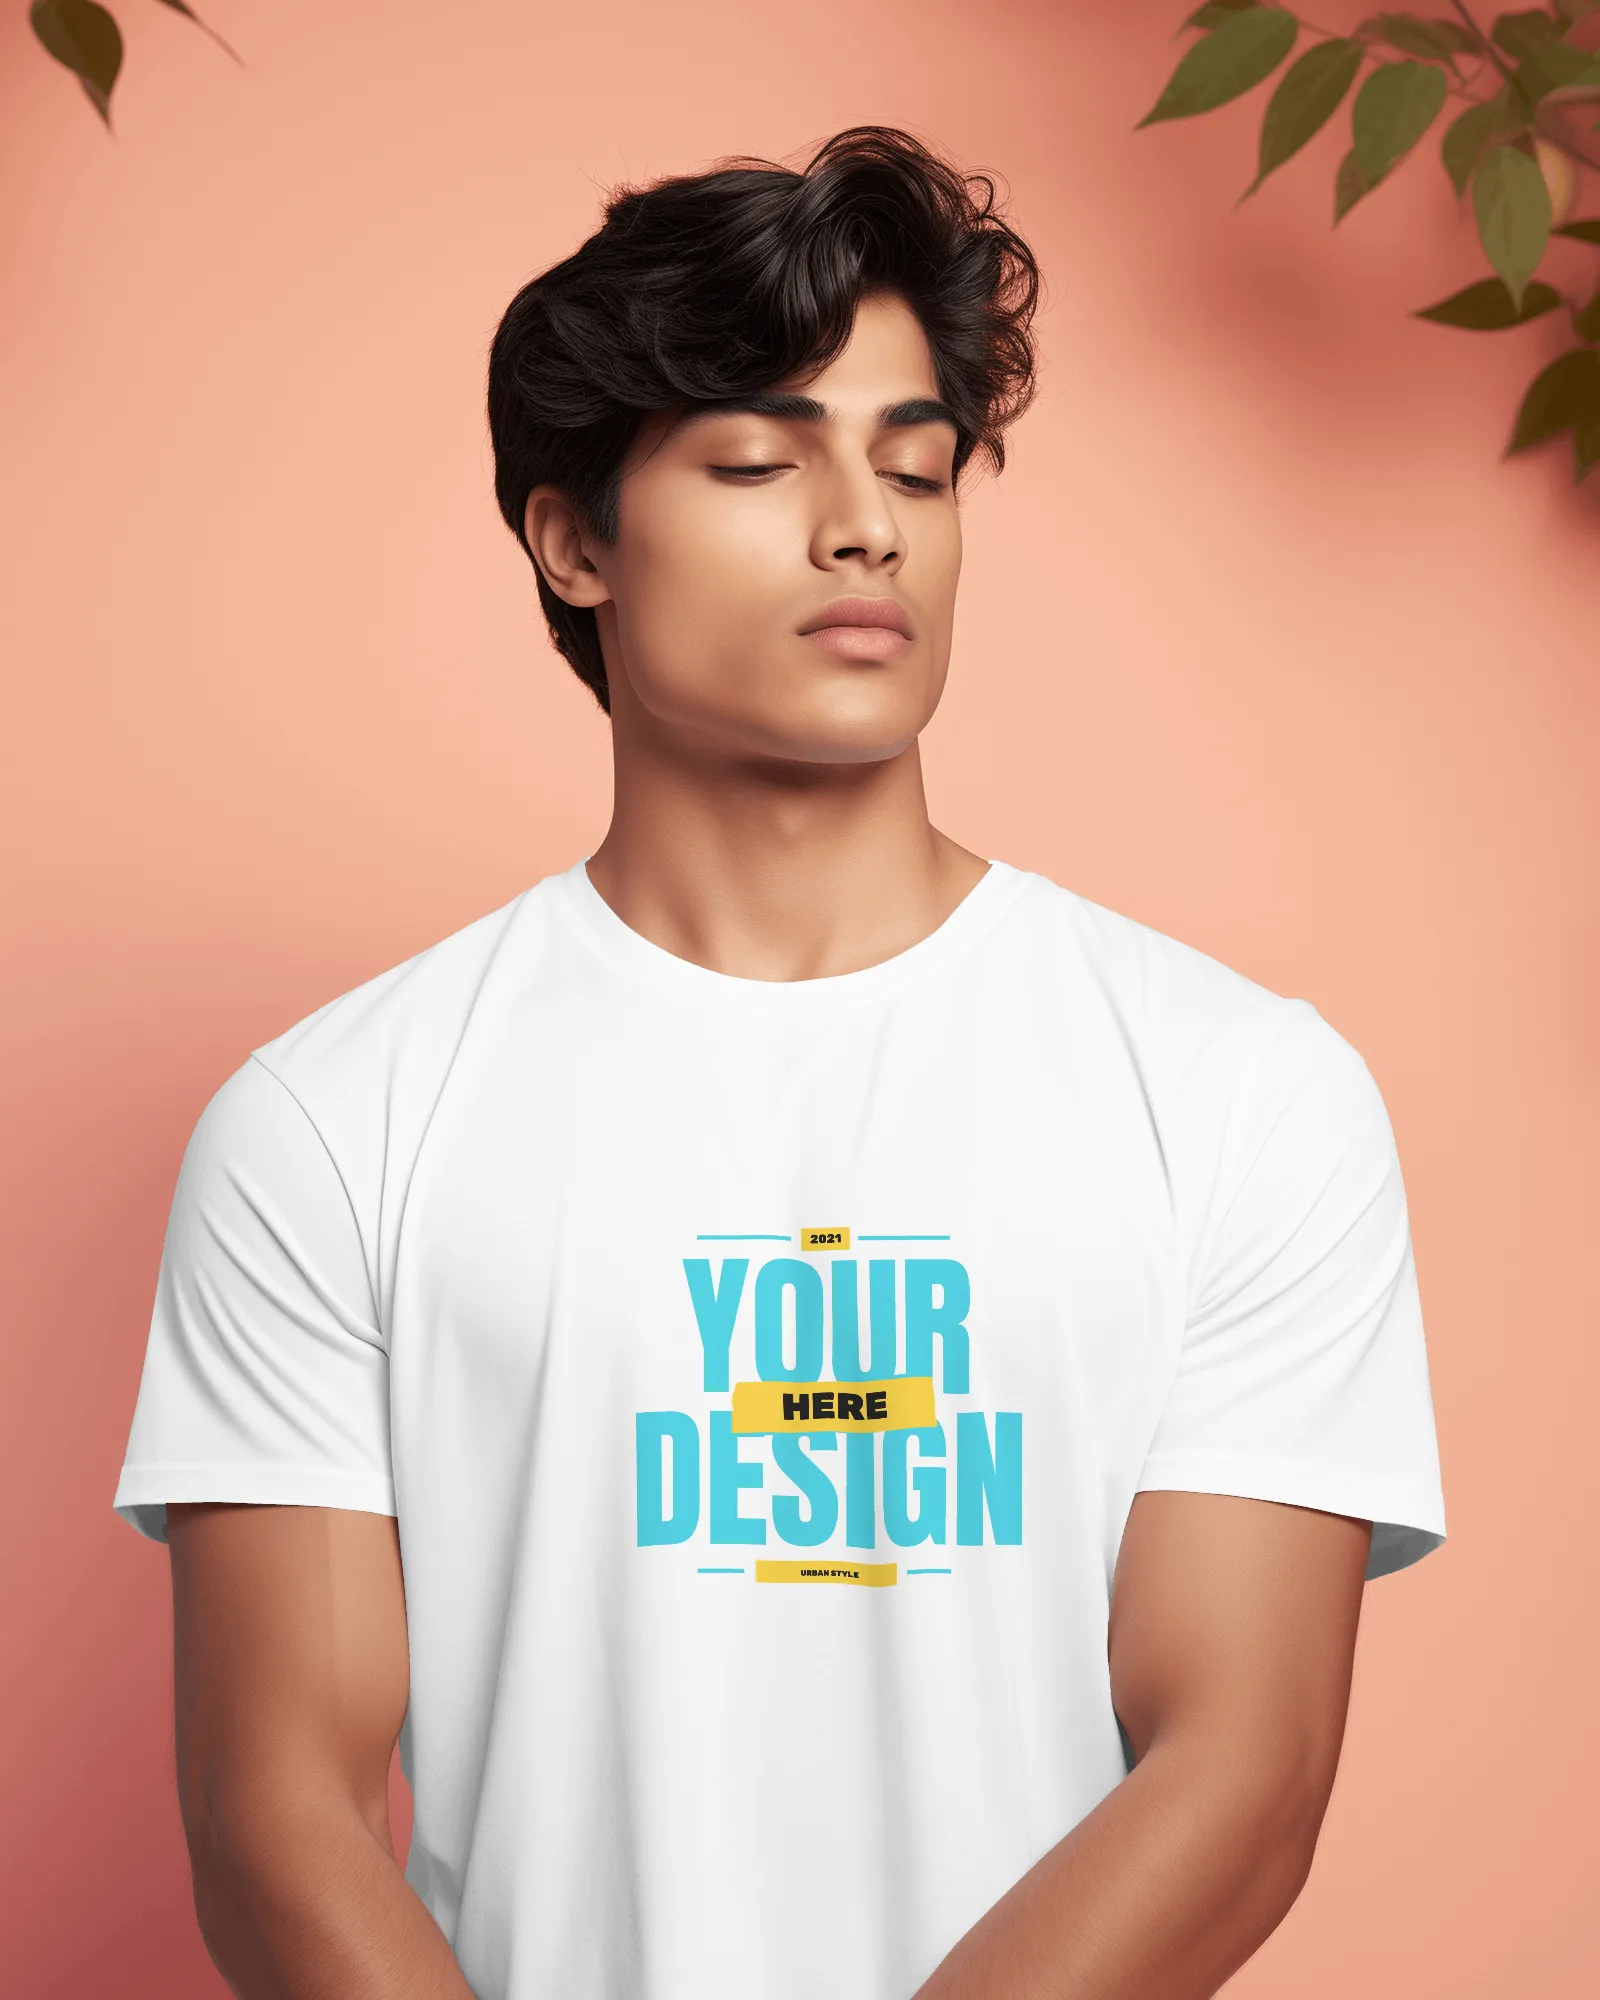 indian male model wearing white tshirt posing in front pink background 